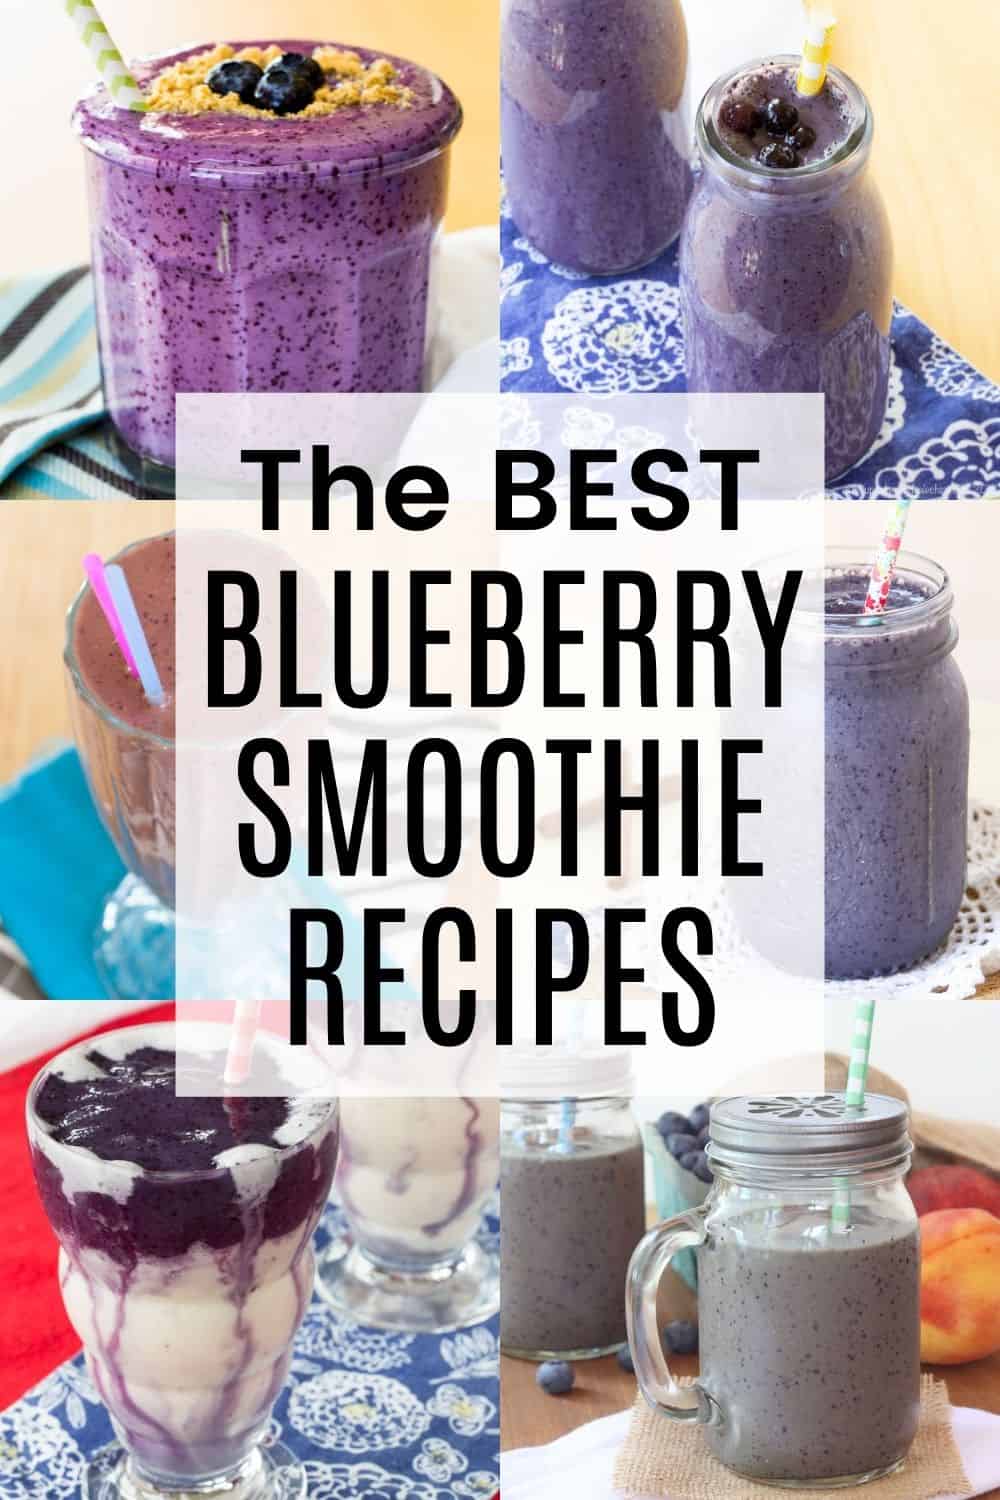 Collage of 6 types of blueberry smoothies with text overlay.